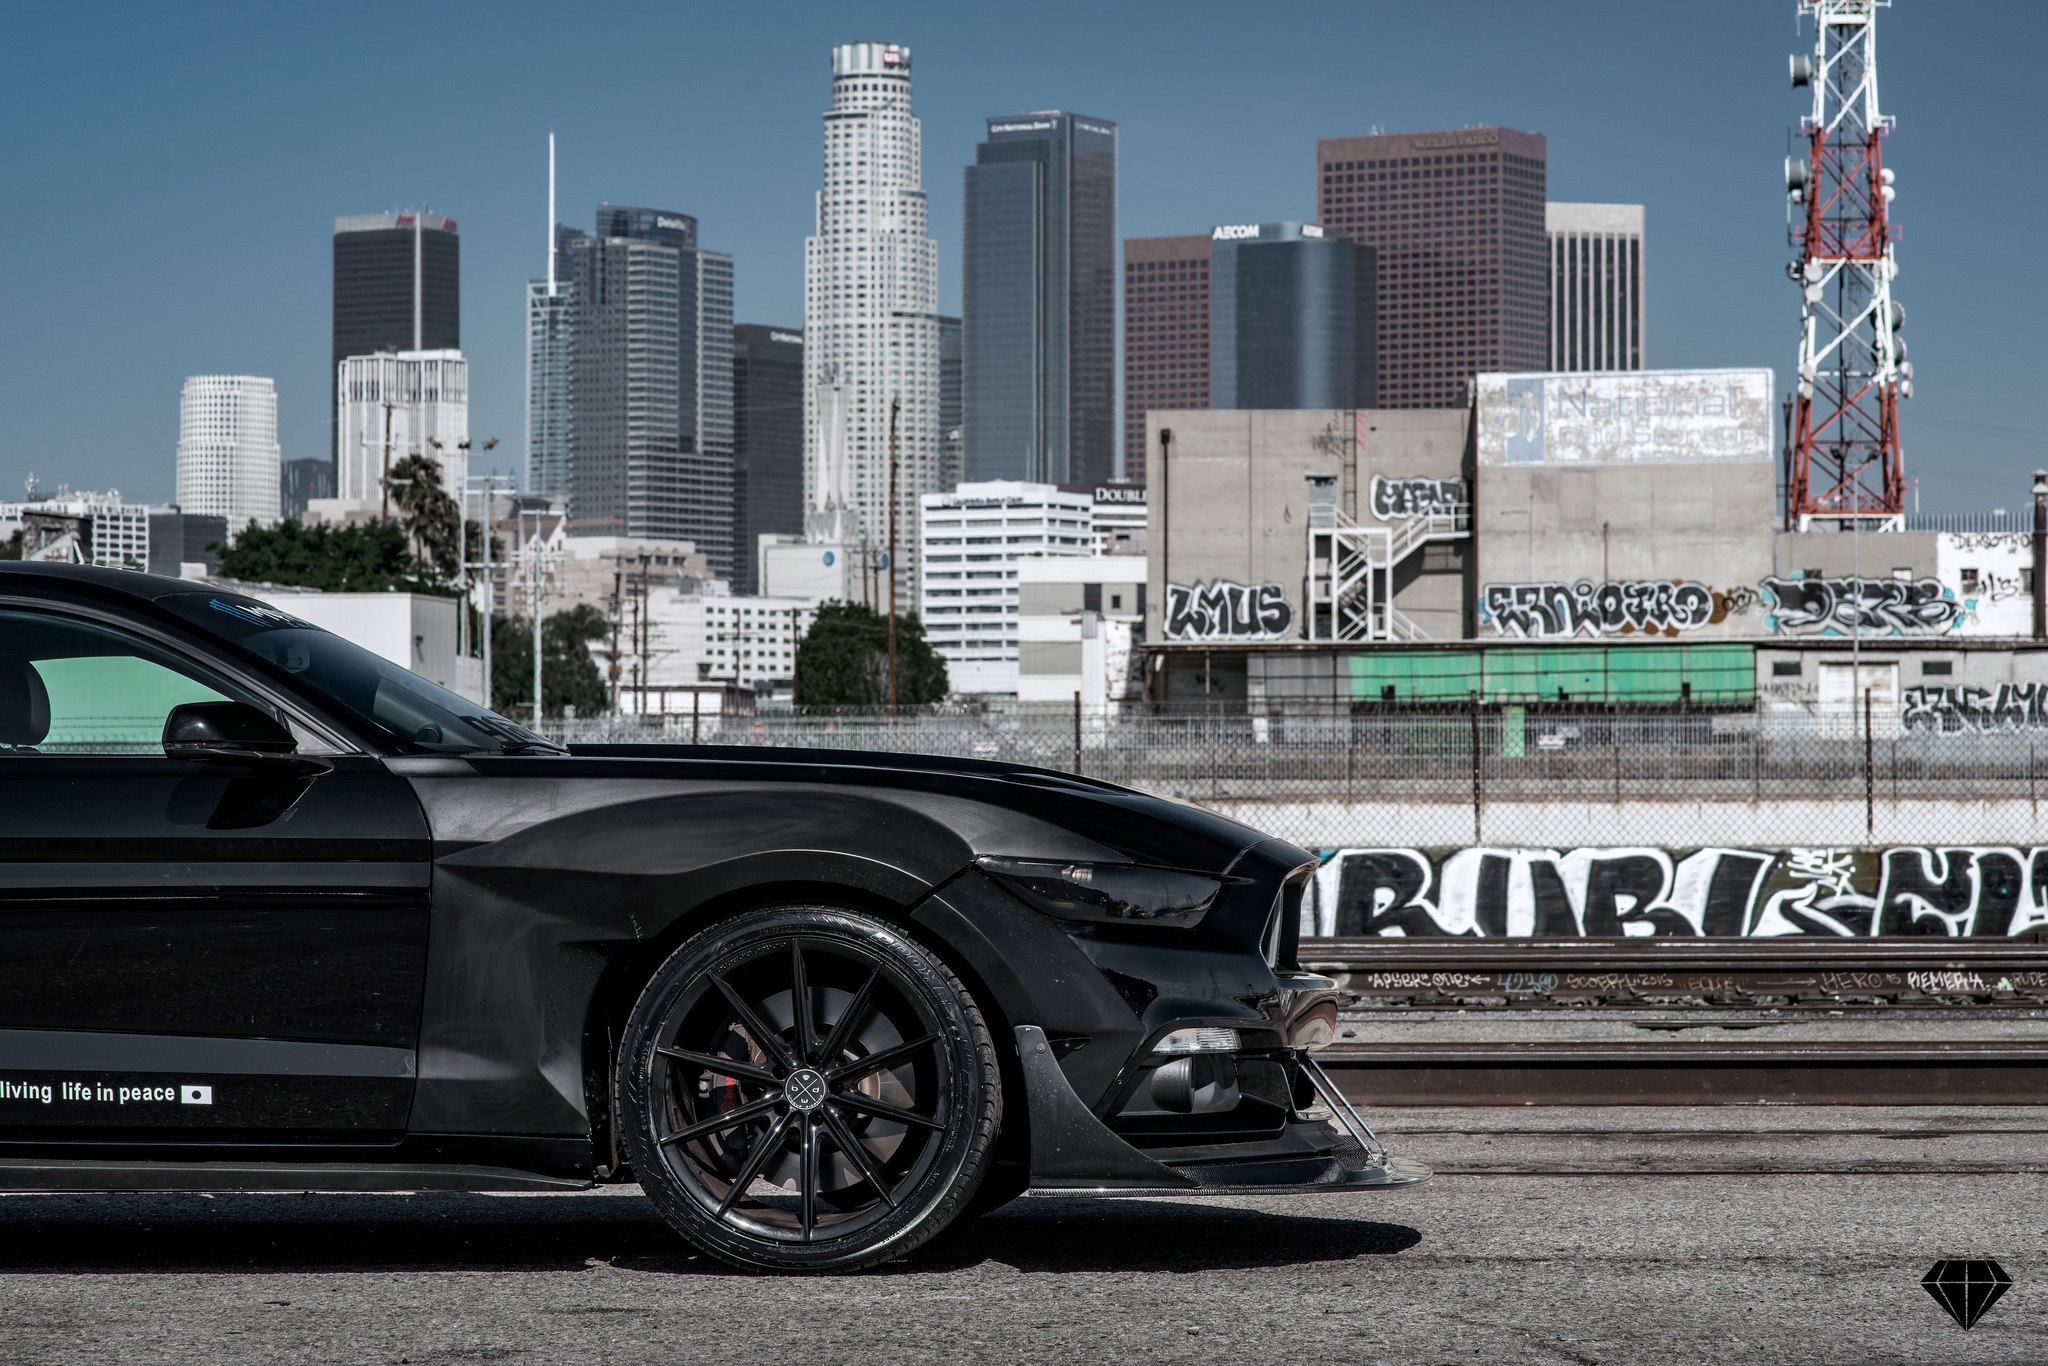 Black Ford Mustang with Blaque Diamond Wheels - Photo by Blaque Diamond Wheels